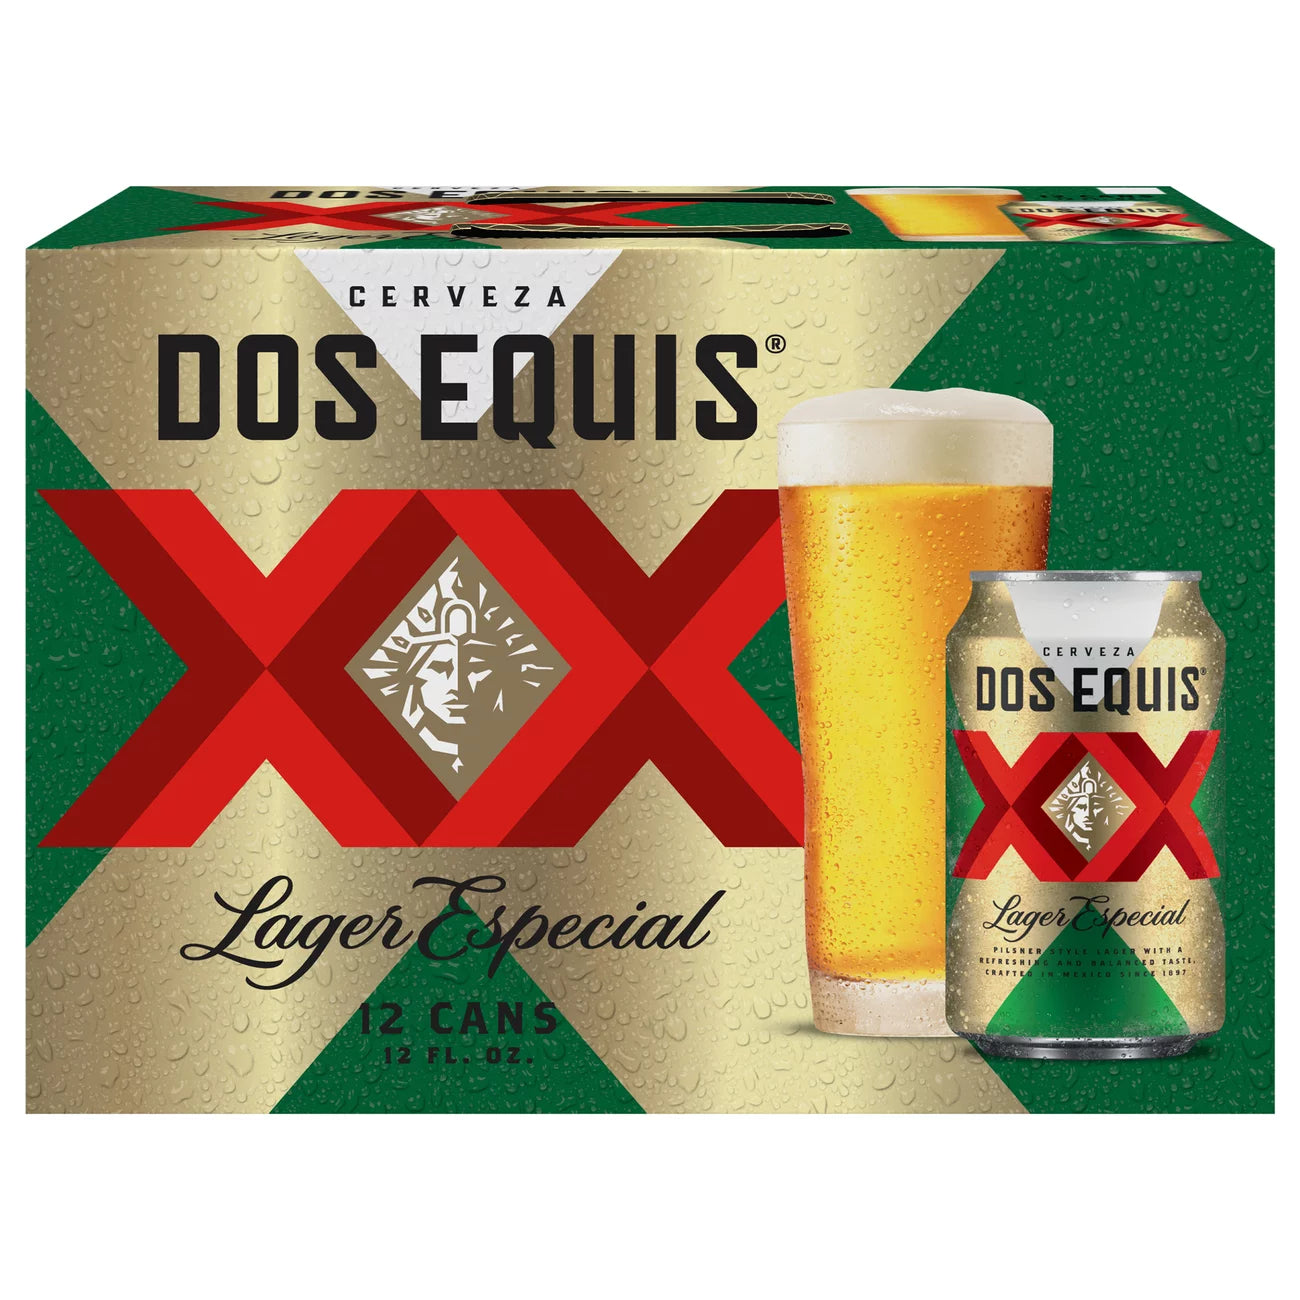 Dos Equis Lager Especial 12 Cans (12 oz)